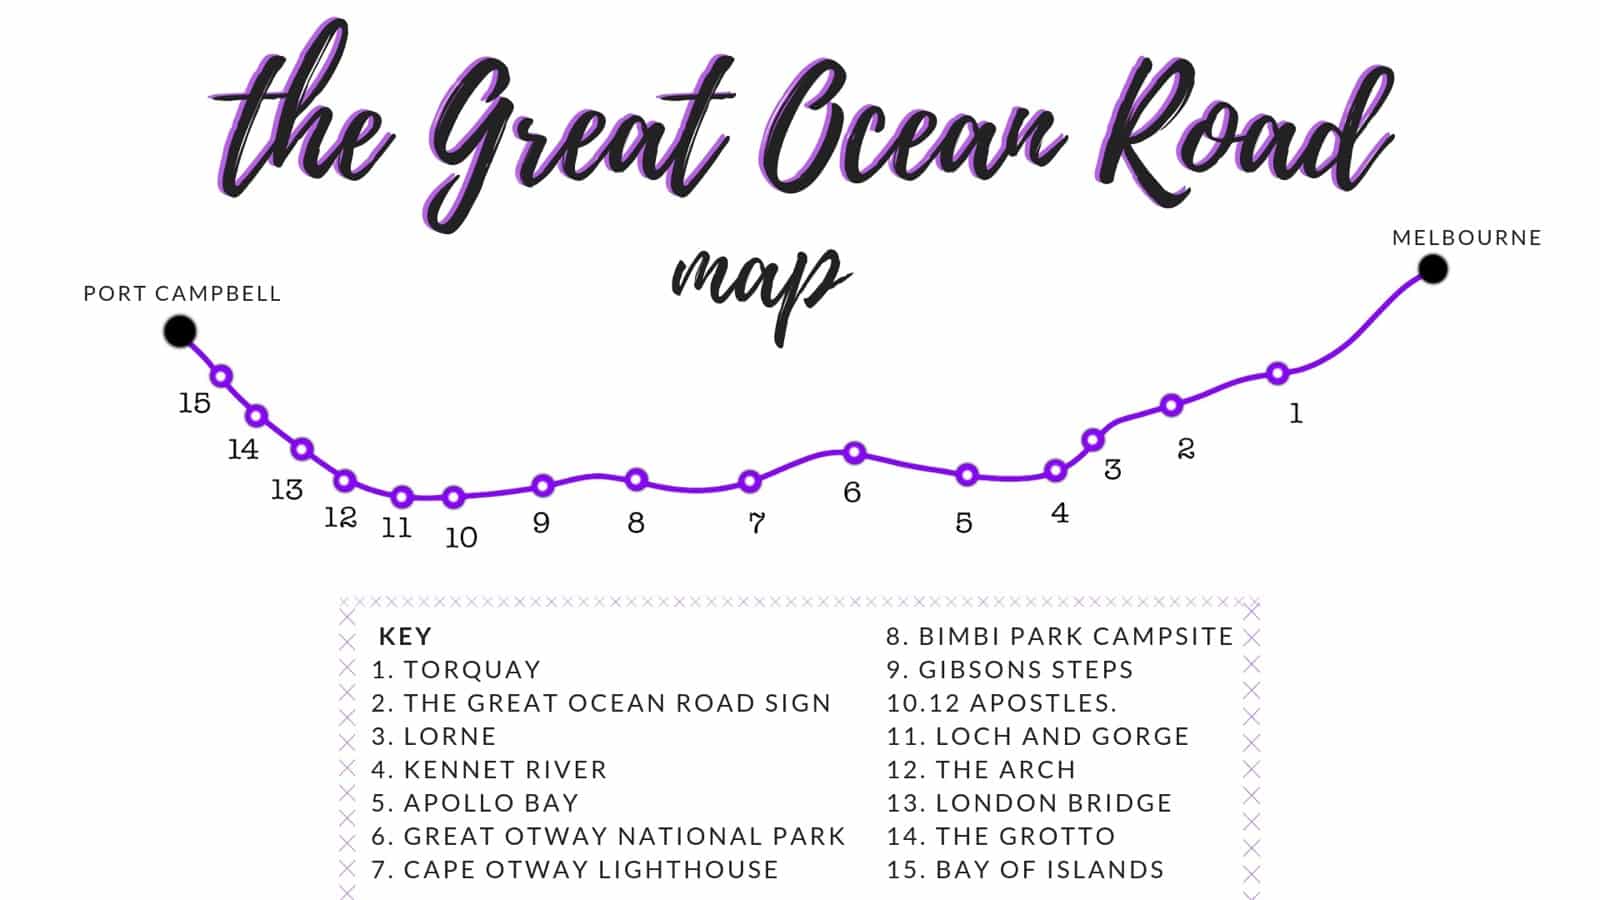 Our Great Ocean Road Itinerary A Guide To Australias Coastal Road 6083